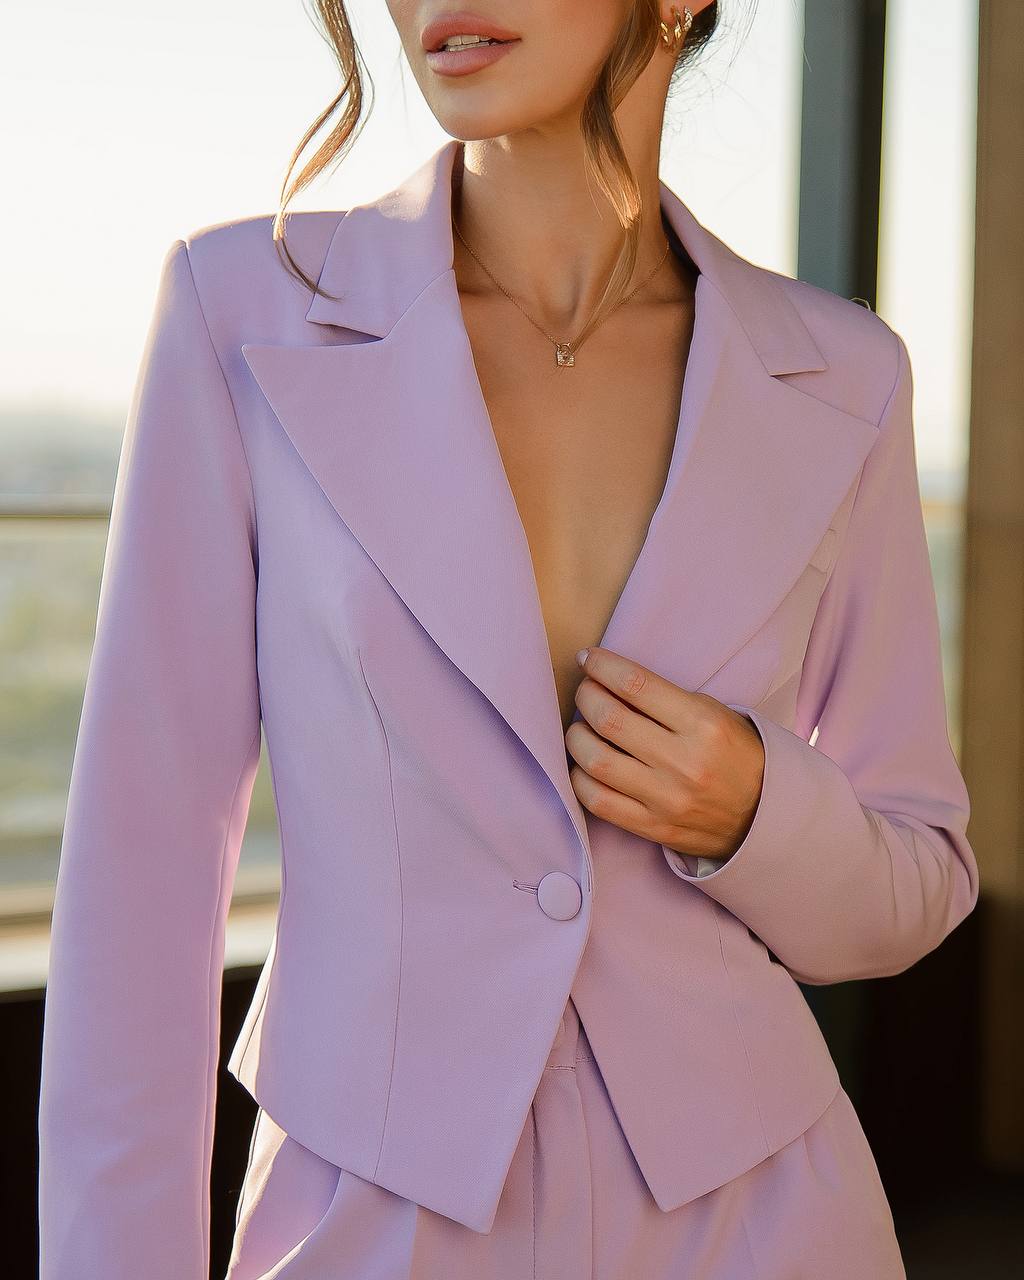 a woman wearing a purple suit and a necklace